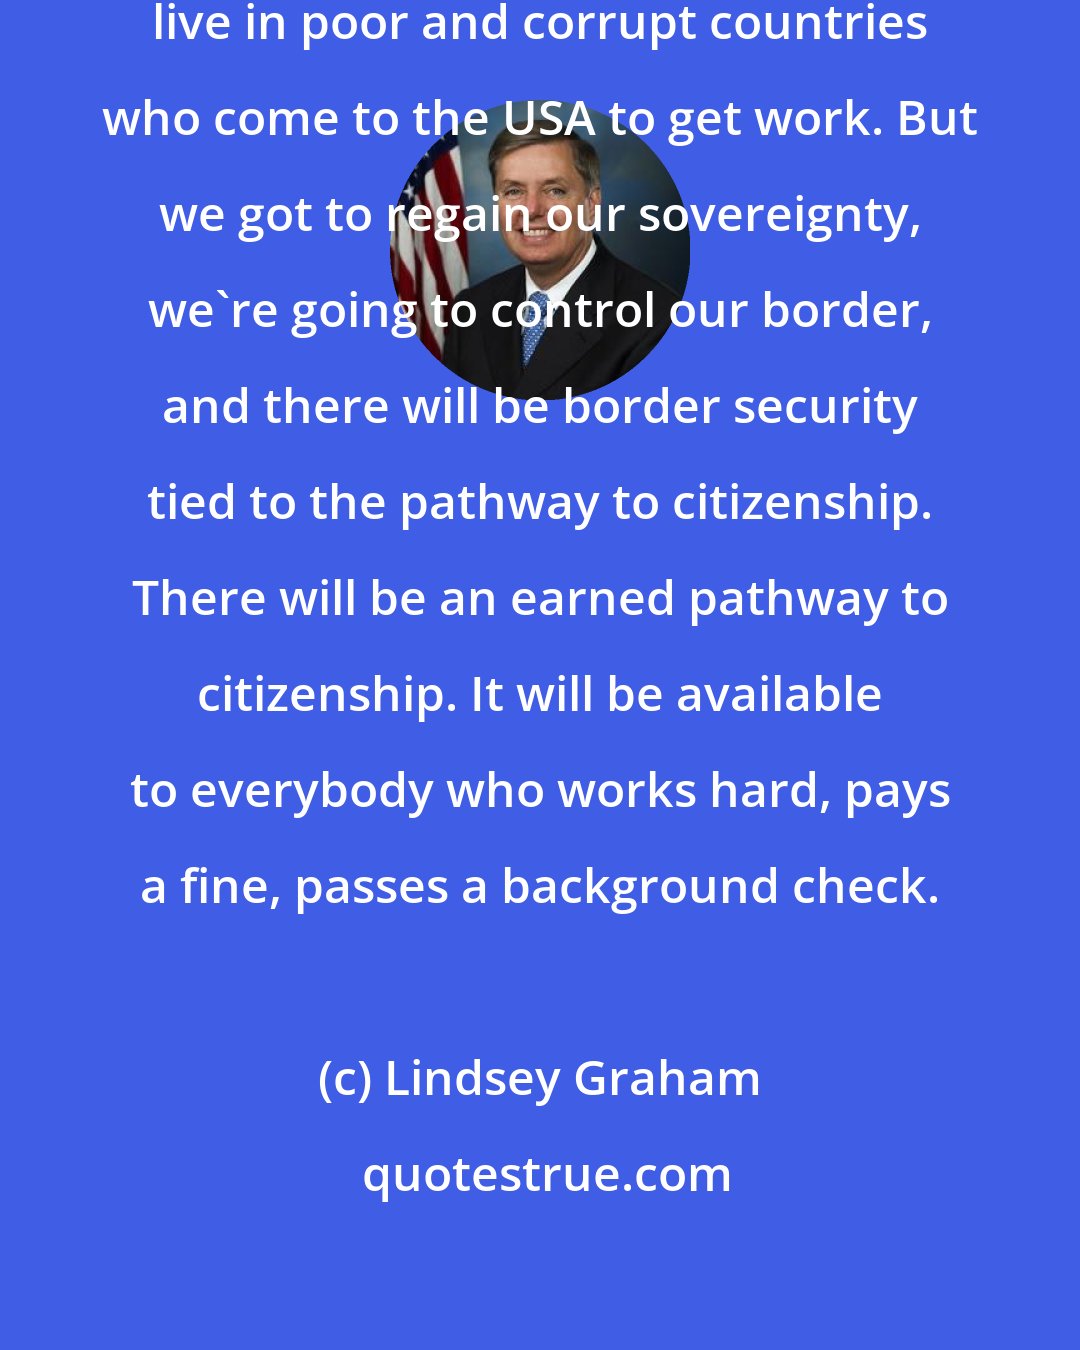 Lindsey Graham: We're being overrun by people who live in poor and corrupt countries who come to the USA to get work. But we got to regain our sovereignty, we're going to control our border, and there will be border security tied to the pathway to citizenship. There will be an earned pathway to citizenship. It will be available to everybody who works hard, pays a fine, passes a background check.